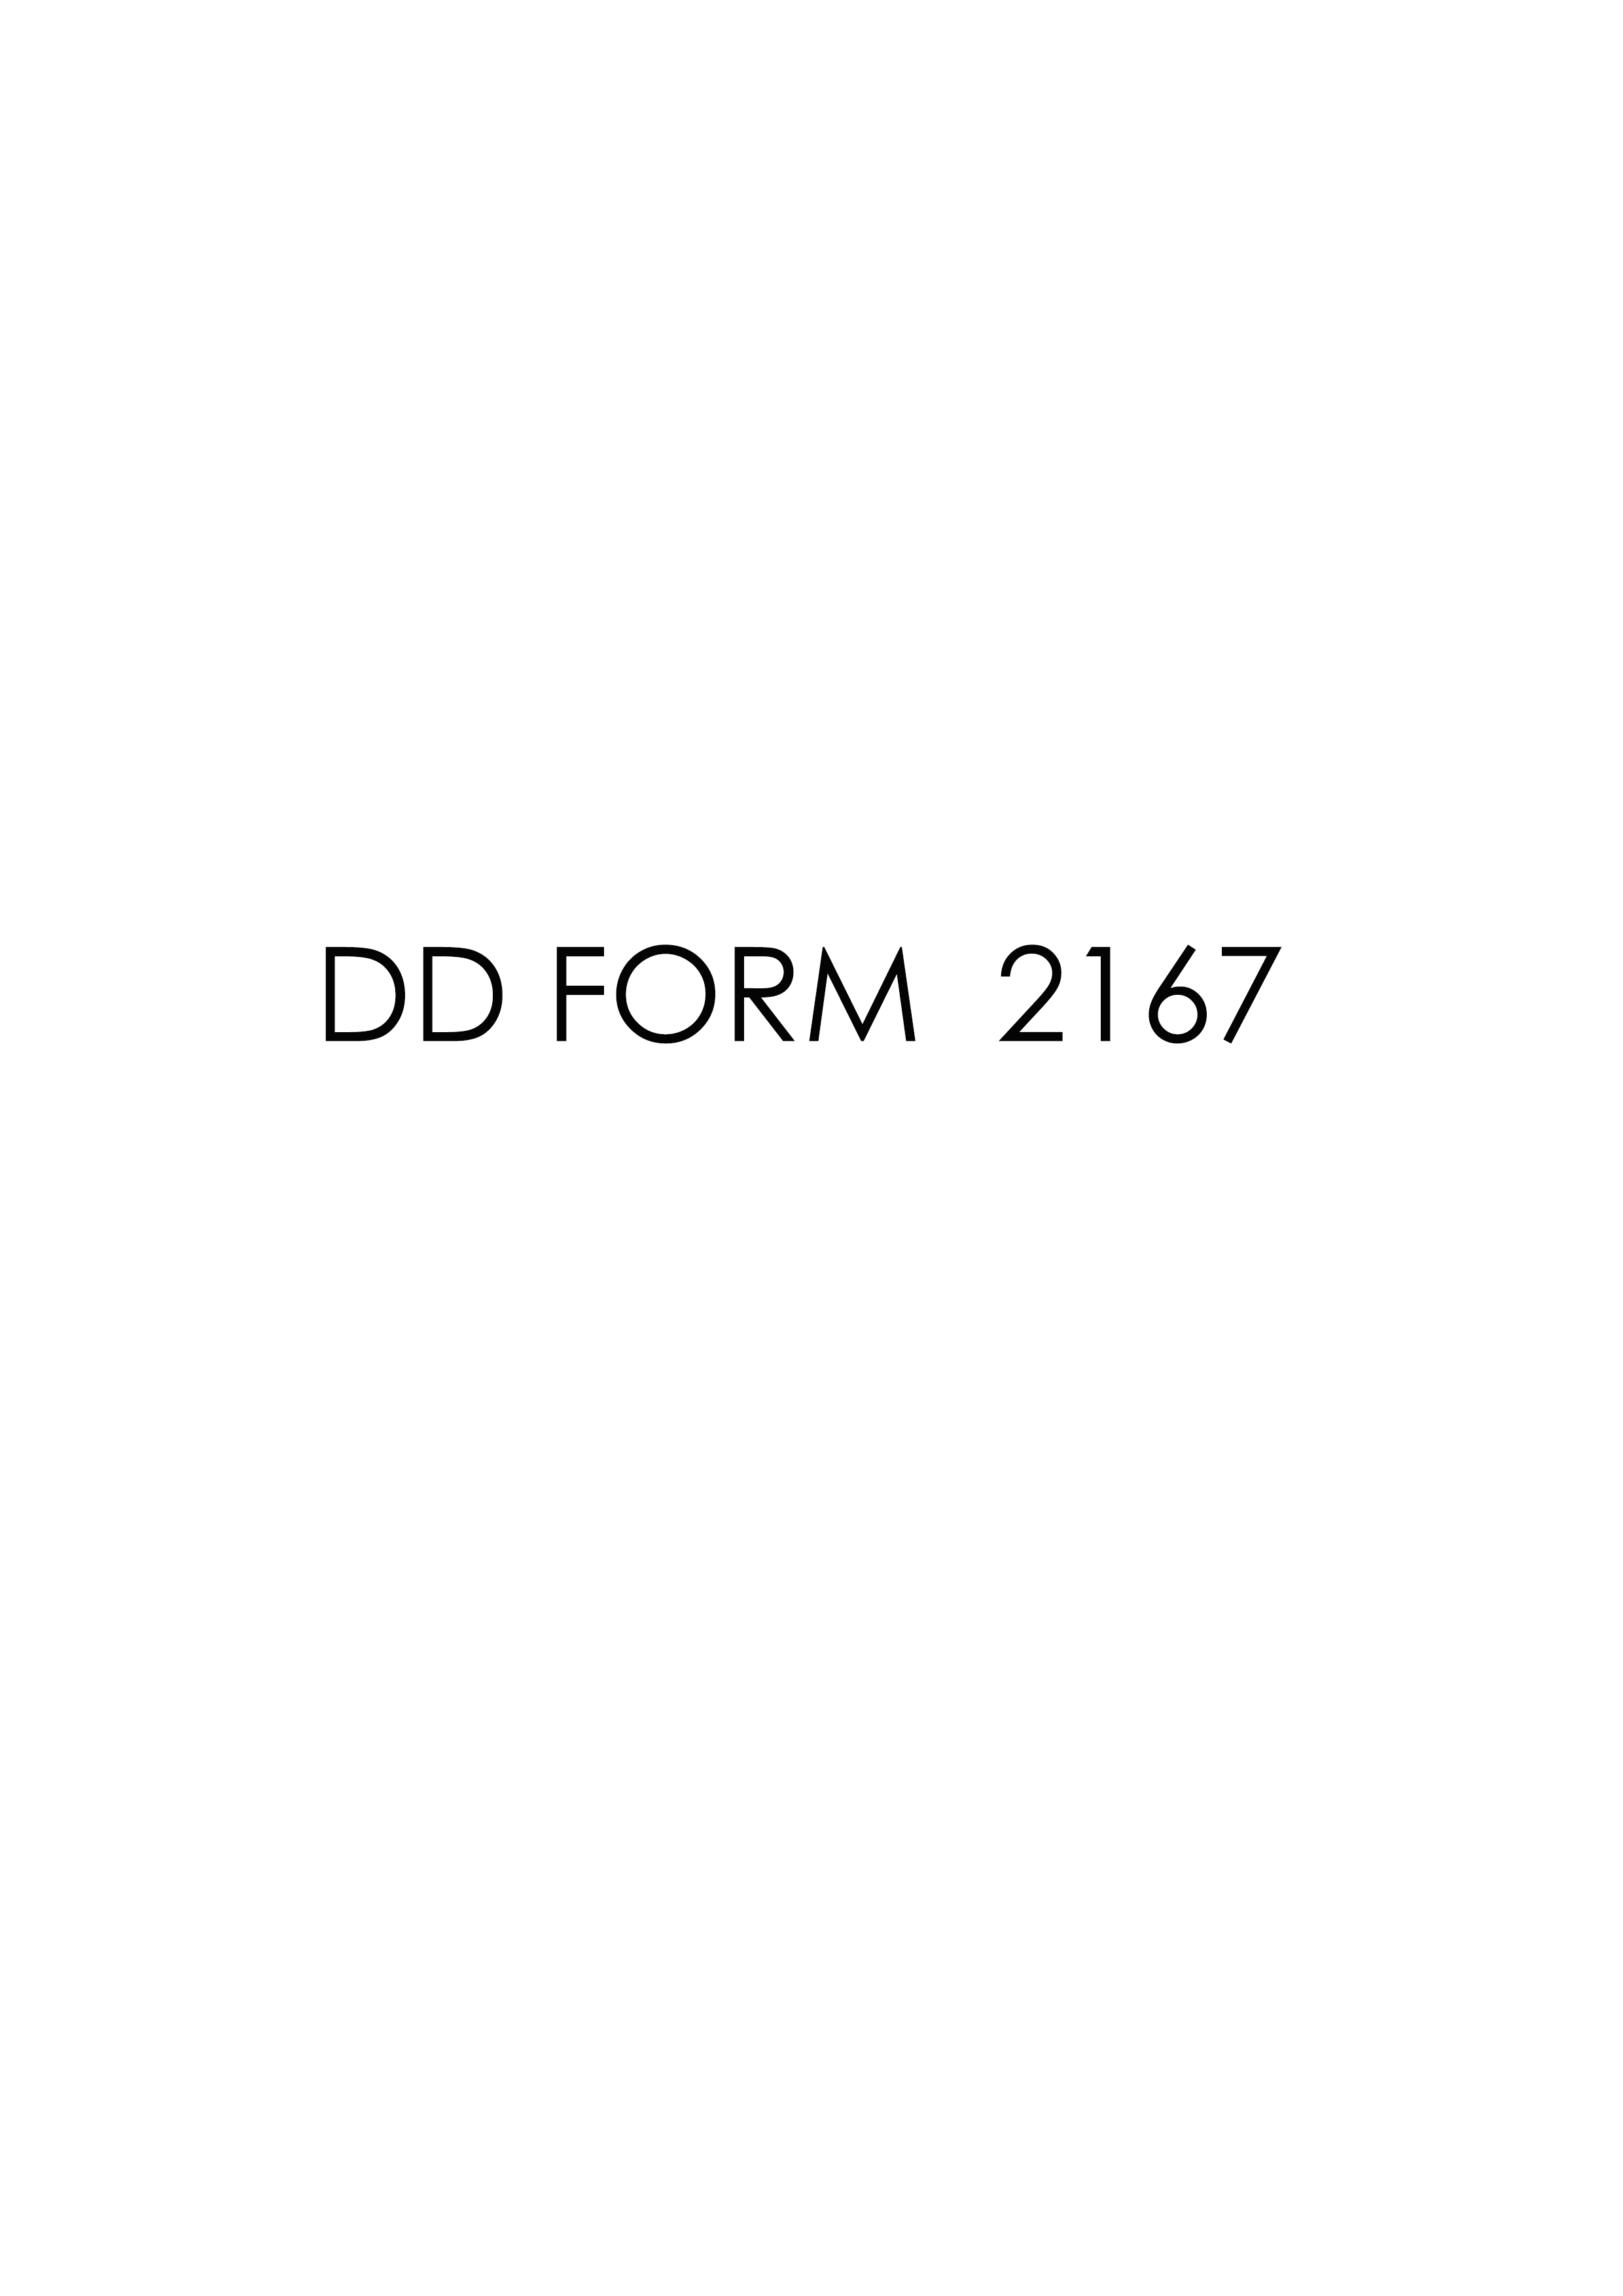 Download Fillable dd Form 2167